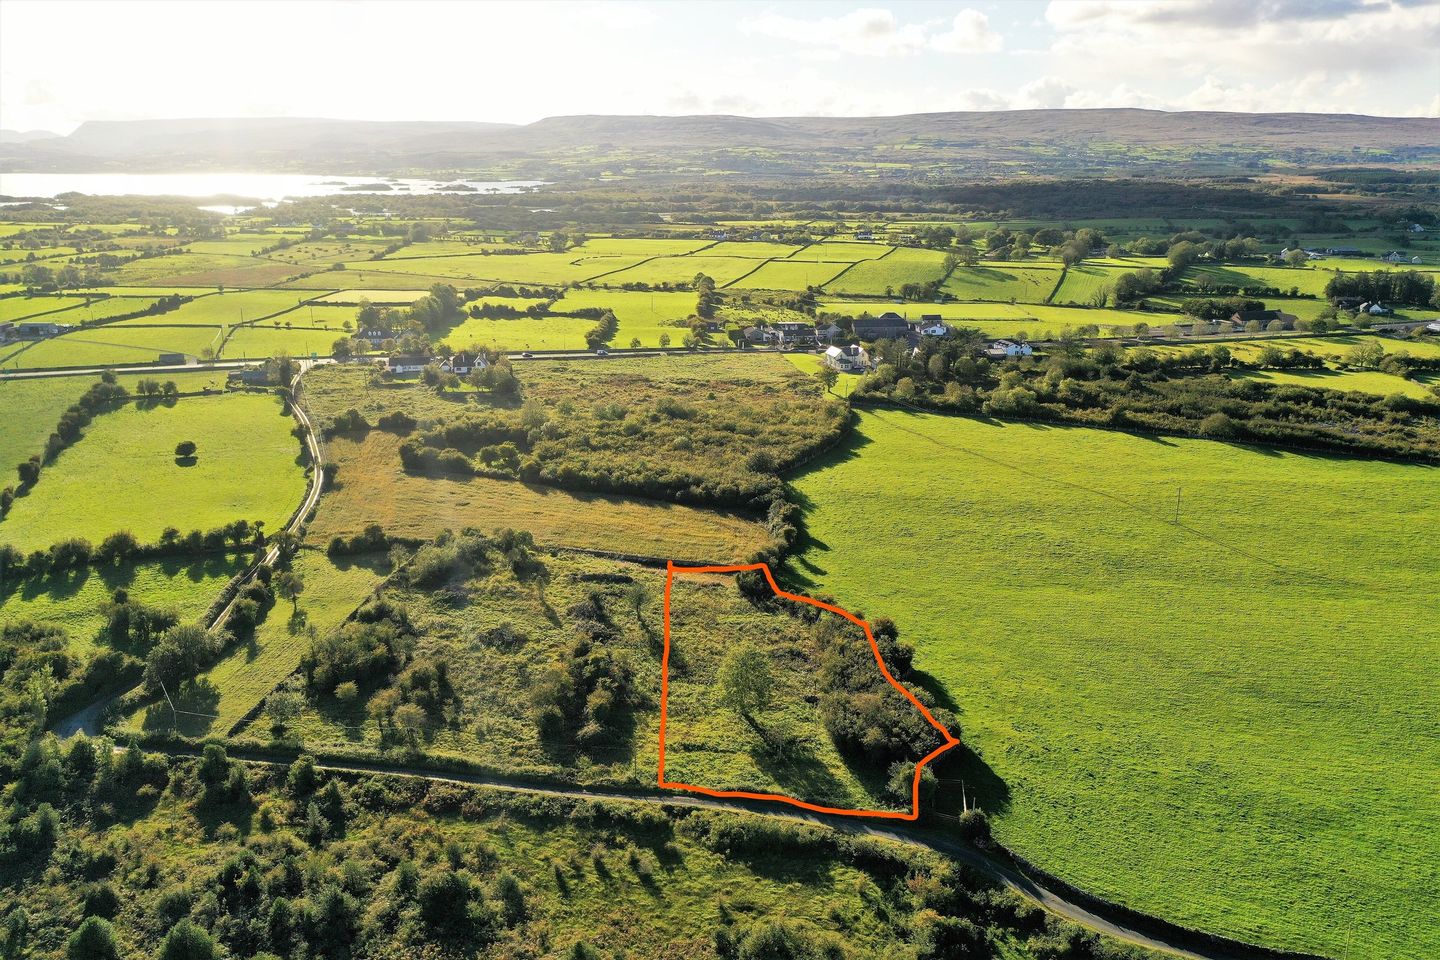 Site - Knockleanore, Partry, Ballinrobe, Co. Mayo